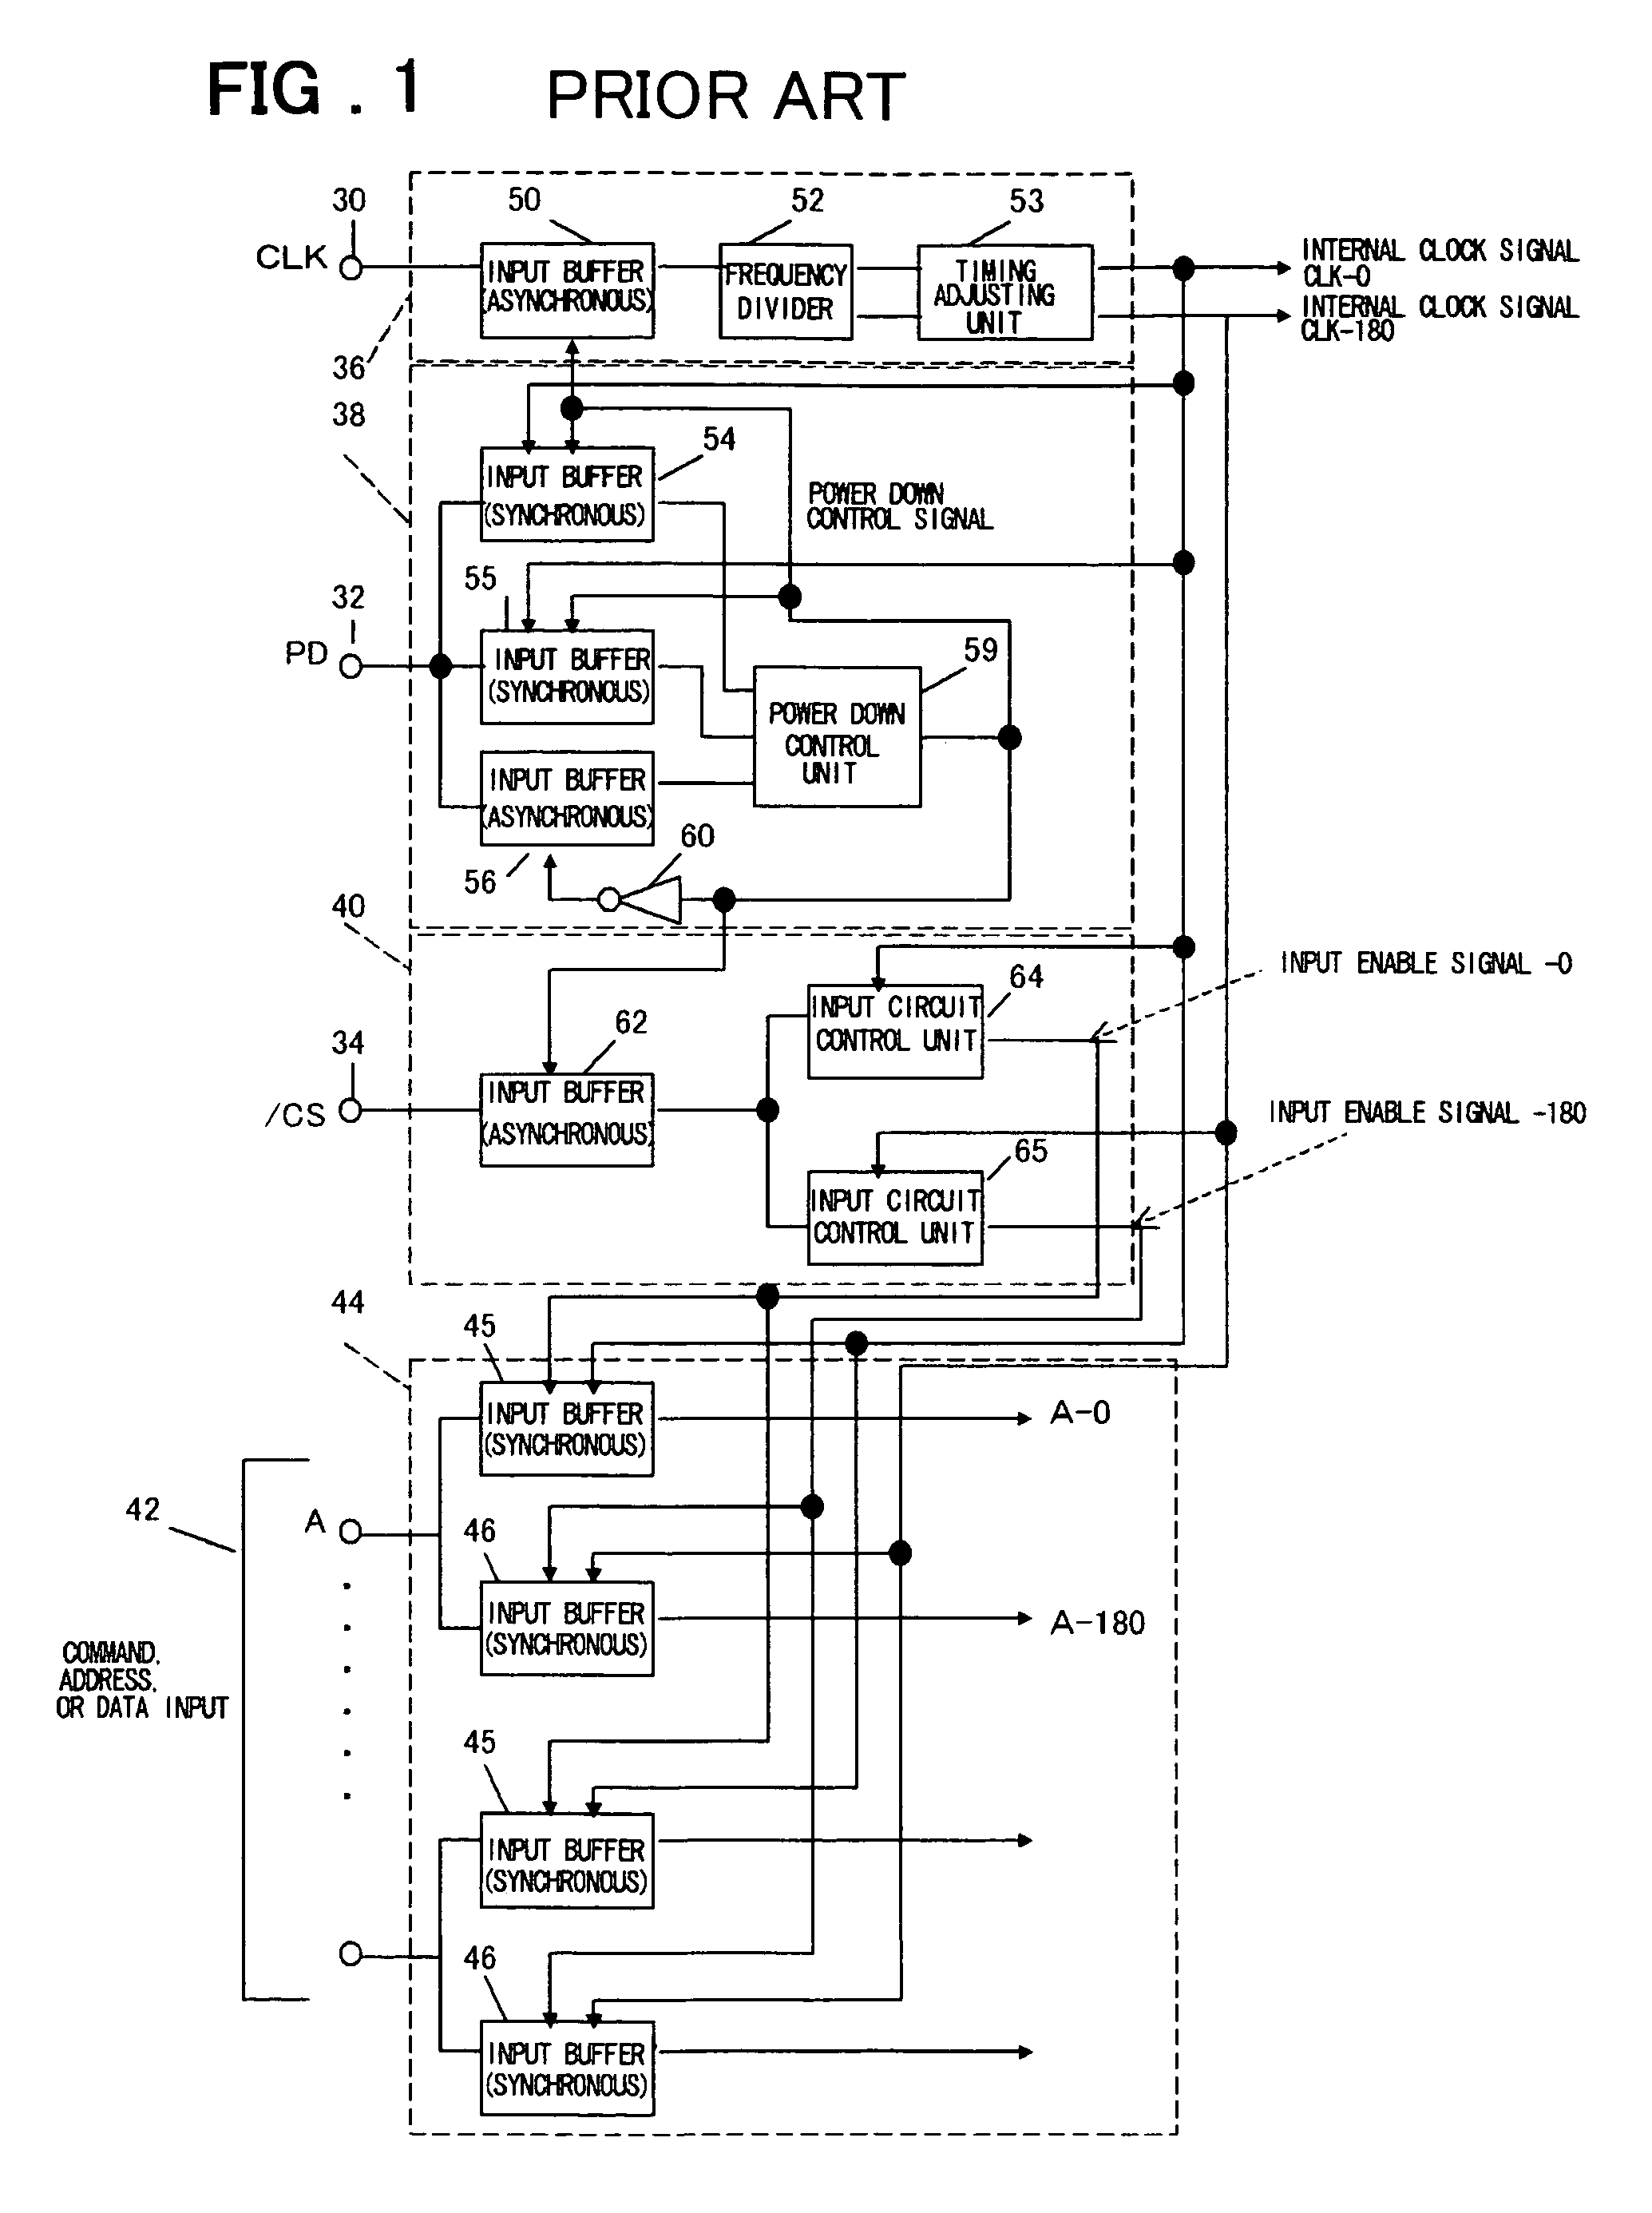 Synchronous type semiconductor device for high speed data processing